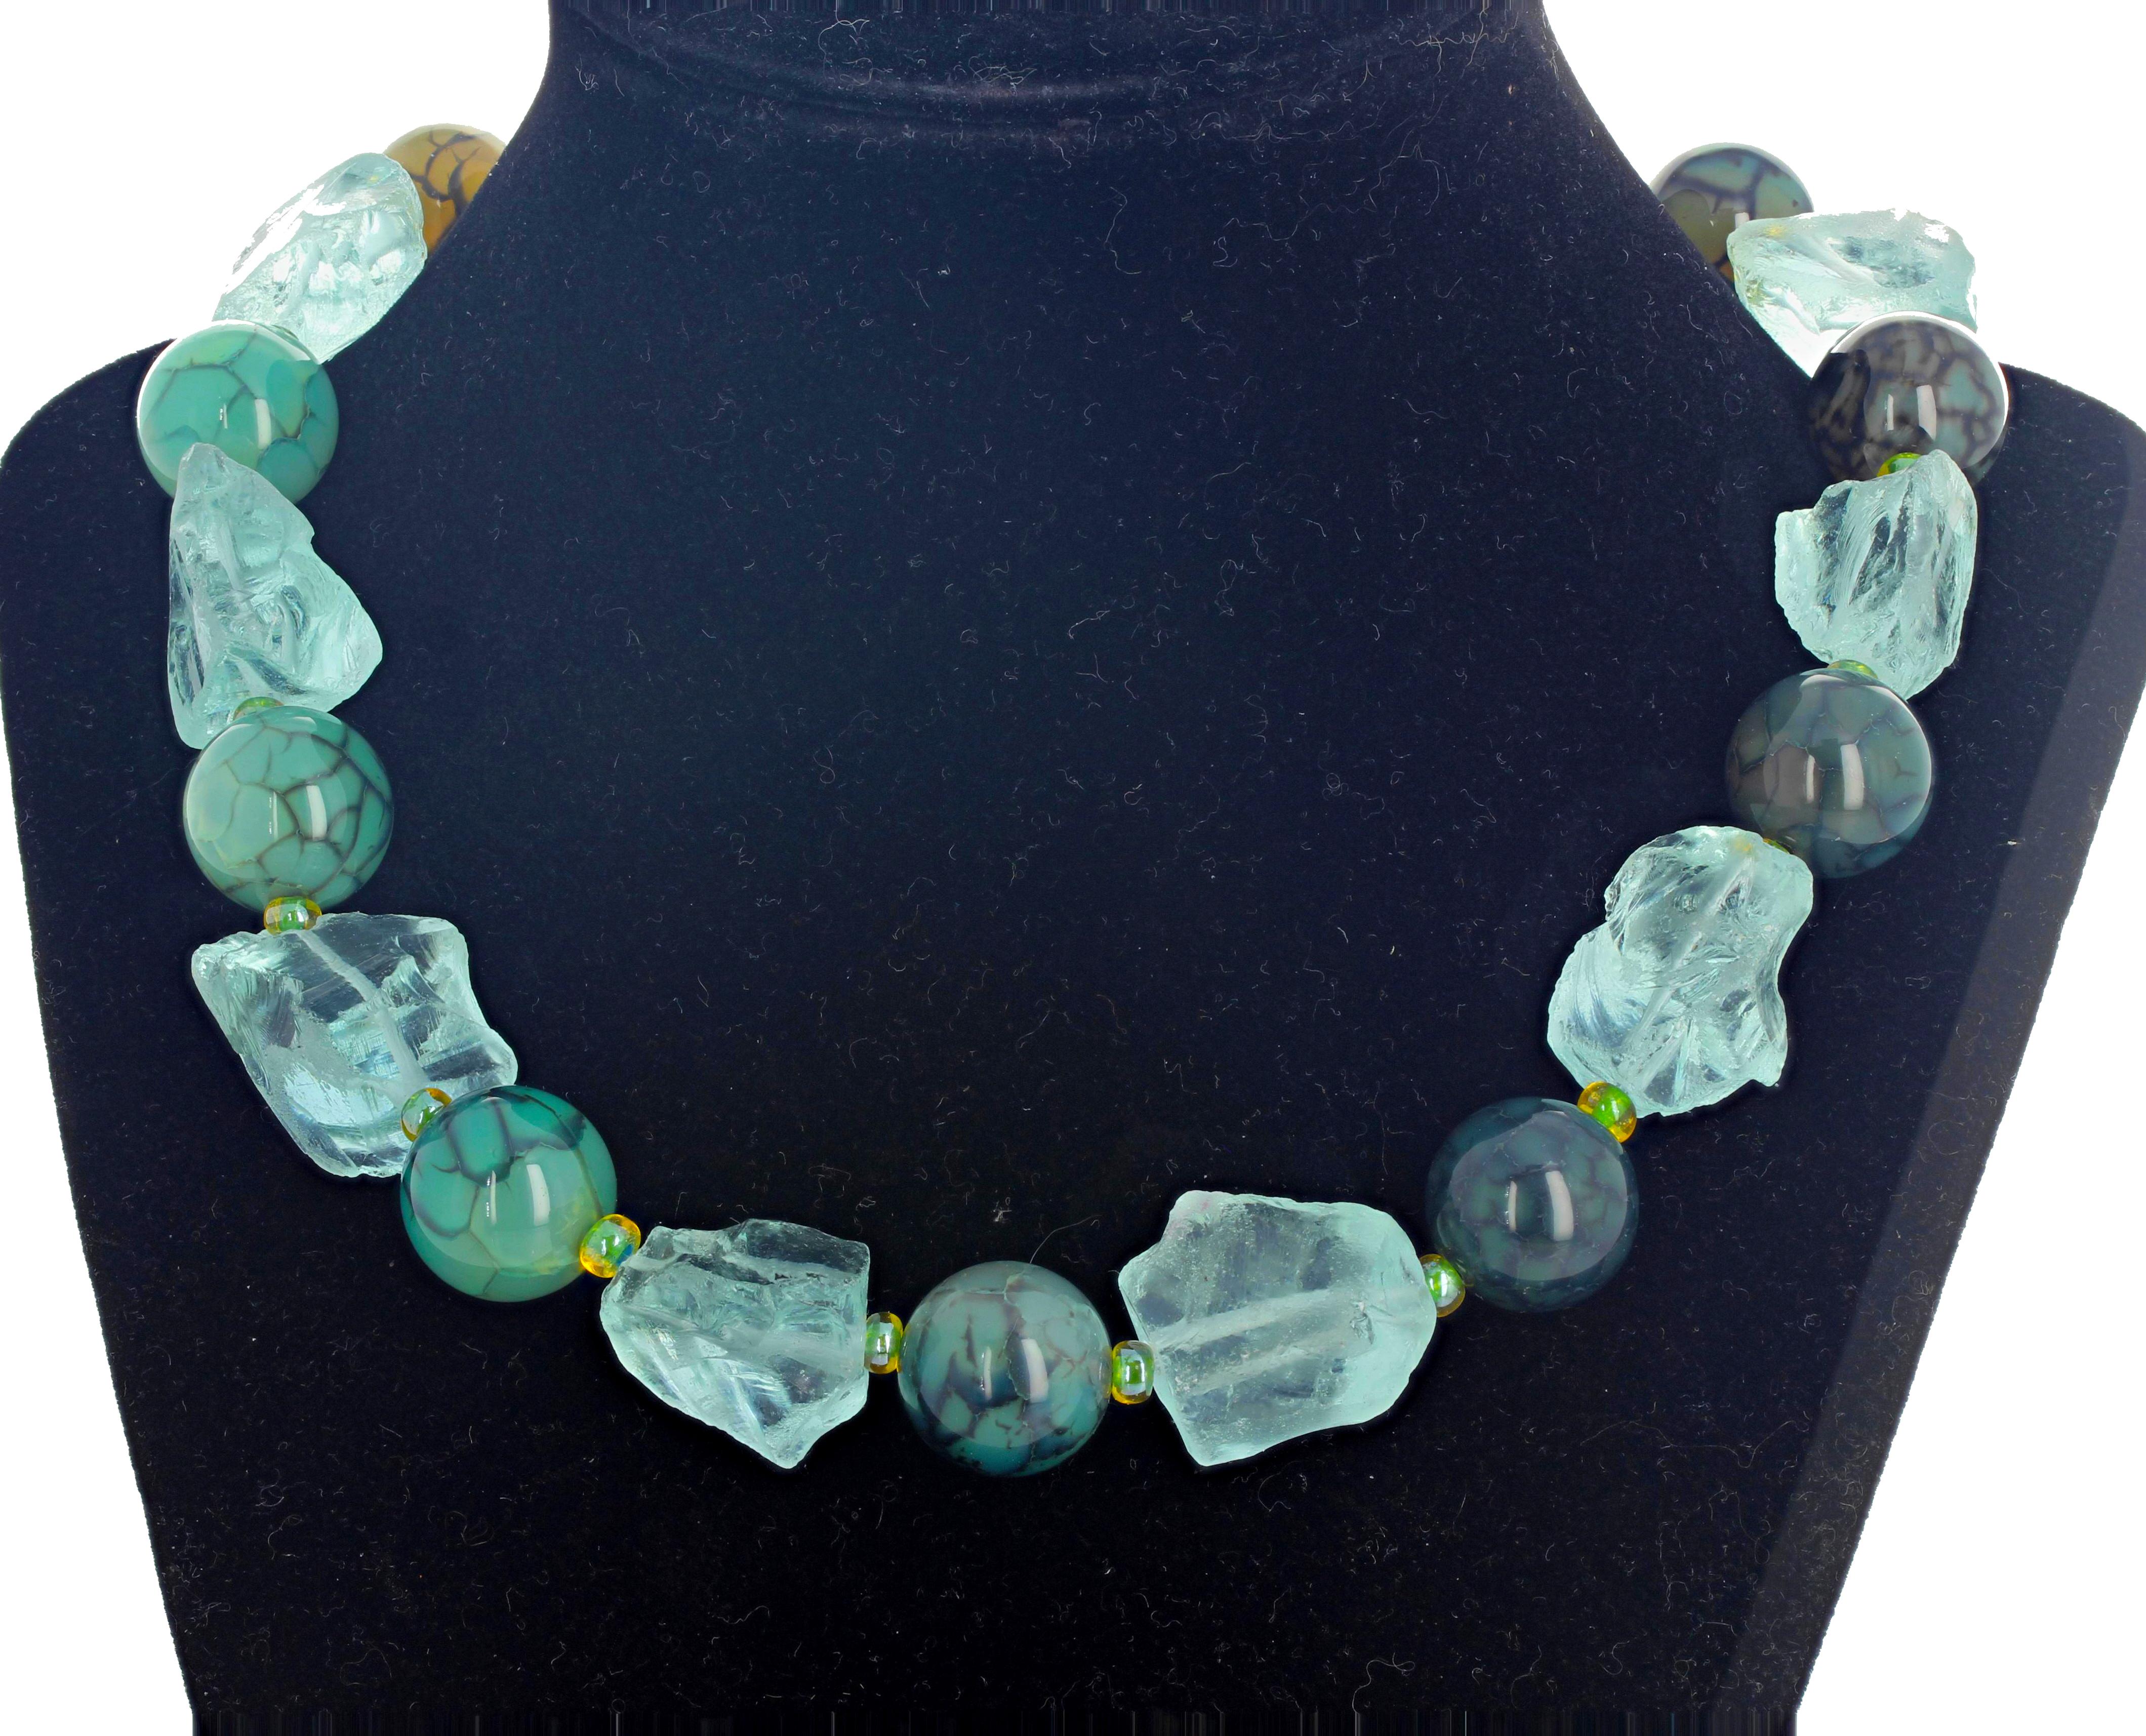 Gorgeous elegant exquisite unique glistening blue chunks of natural real Aquamarines from the famous mine in Brazil enhanced with glowing greenishblue slightly translucent Spiderweb Jasper set in a 17.5 inch long necklace with silvery hook clasp. 